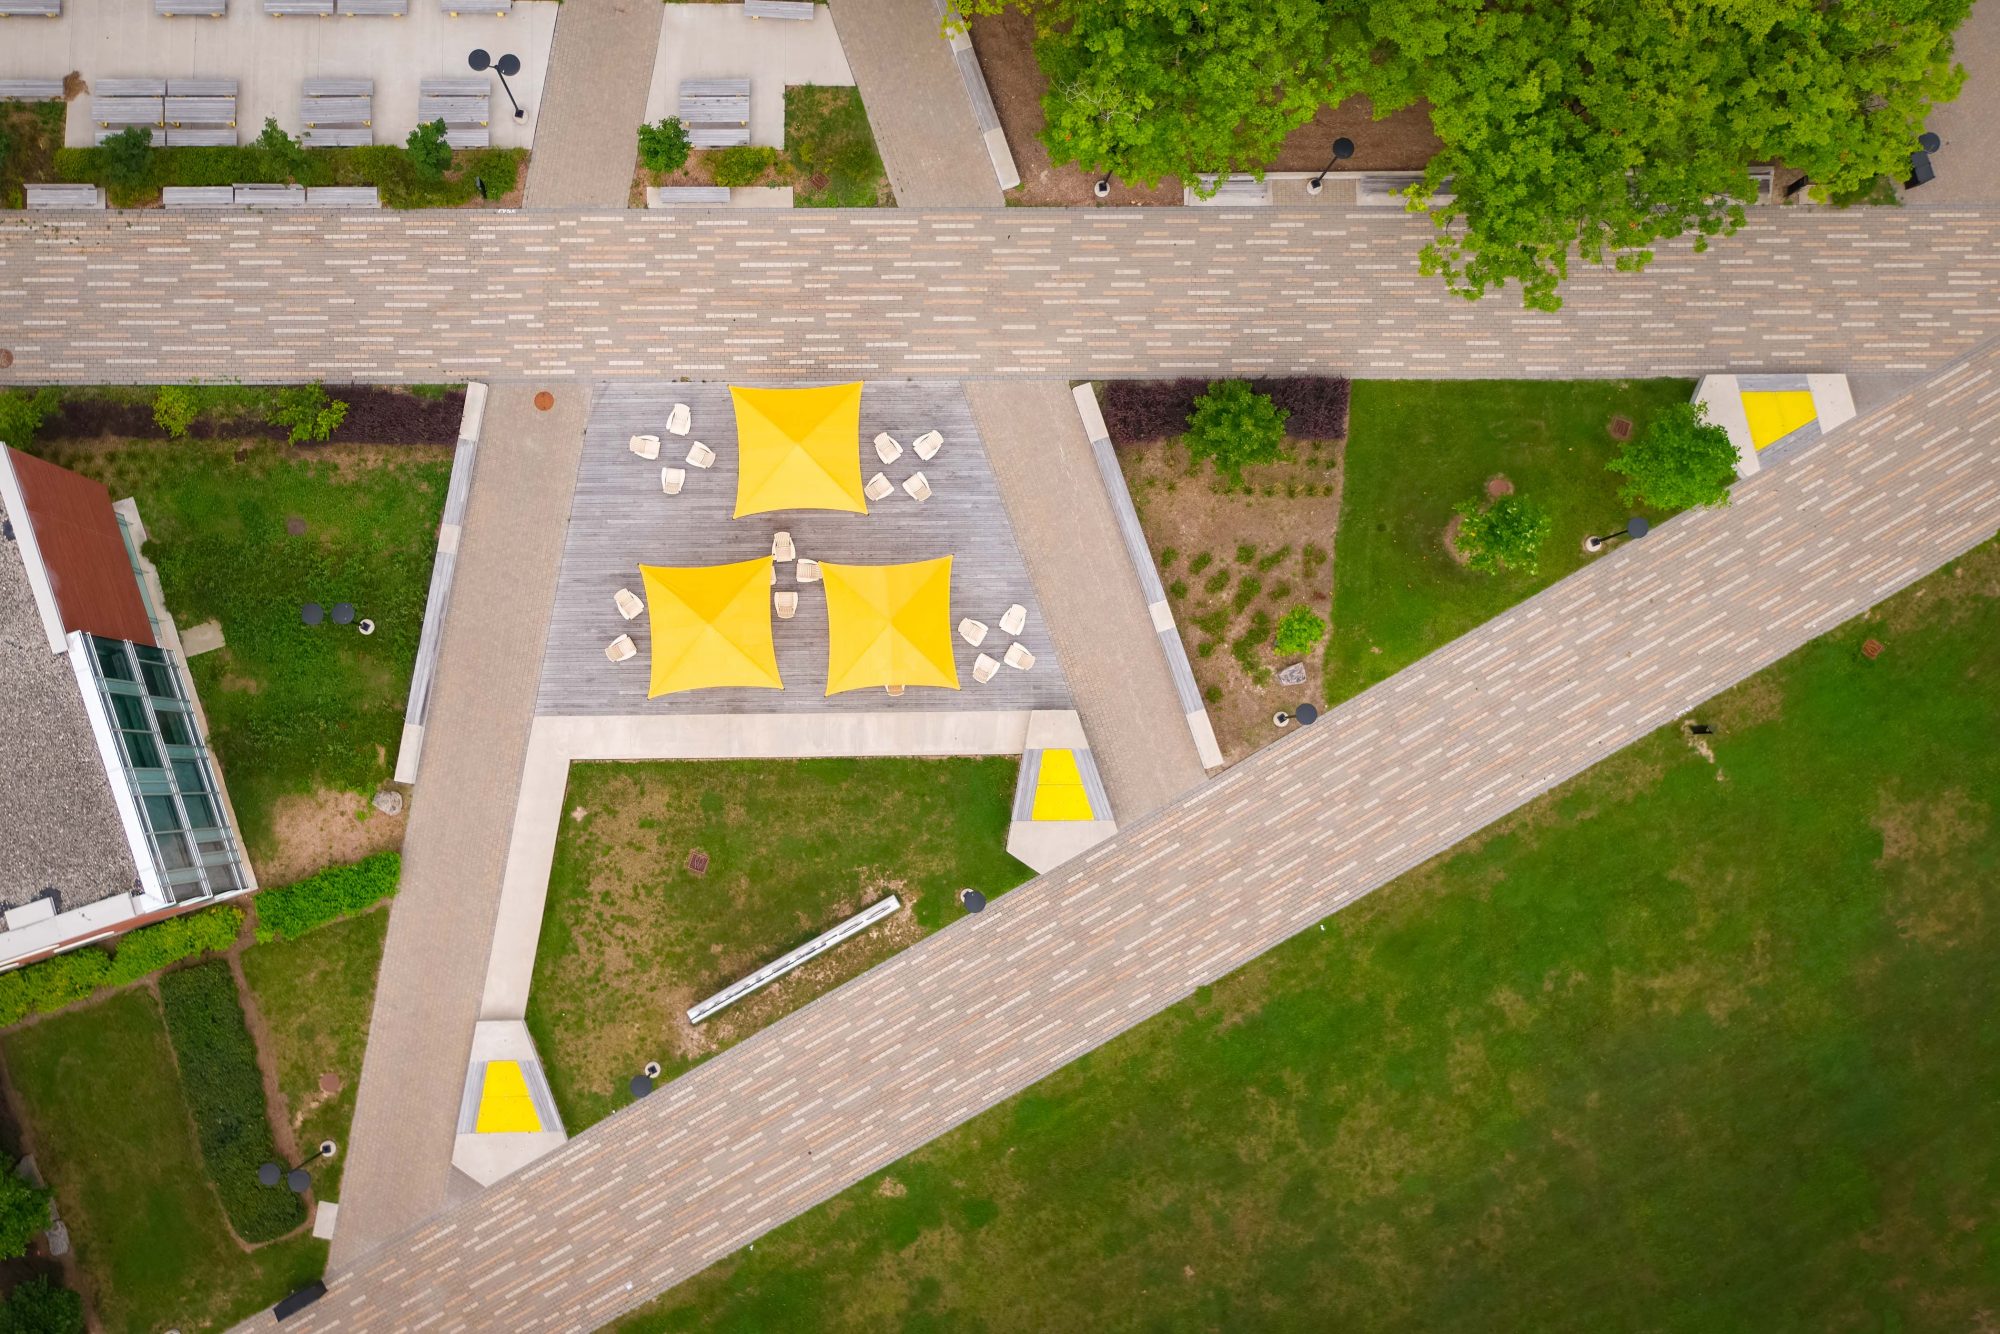 Outdoor common area at the University of Waterloo with three yellow umbrellas and Muskoka chairs. Linear interlocked paving is in the shape of a letter A.